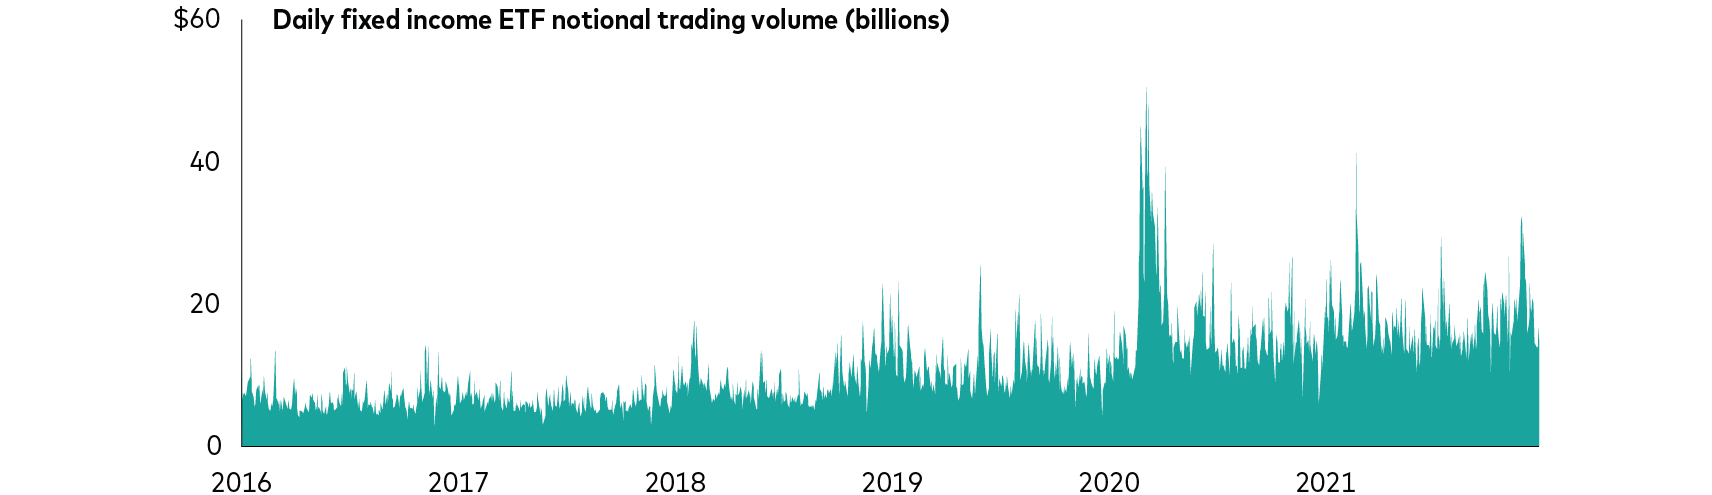 Area chart shows increasing bond ETF trading volume from 2016 through December 31, 2021. Average daily volume grew steadily over the six-year period, to about $20 billion per day at the end of 2021—around double the amount of 2016. Trading volume spiked conspicuously during volatile periods, notably during the early part of the COVID-19 lockdown in 2020, during which bond ETF trading volume shot up briefly to around $50 billion per day.